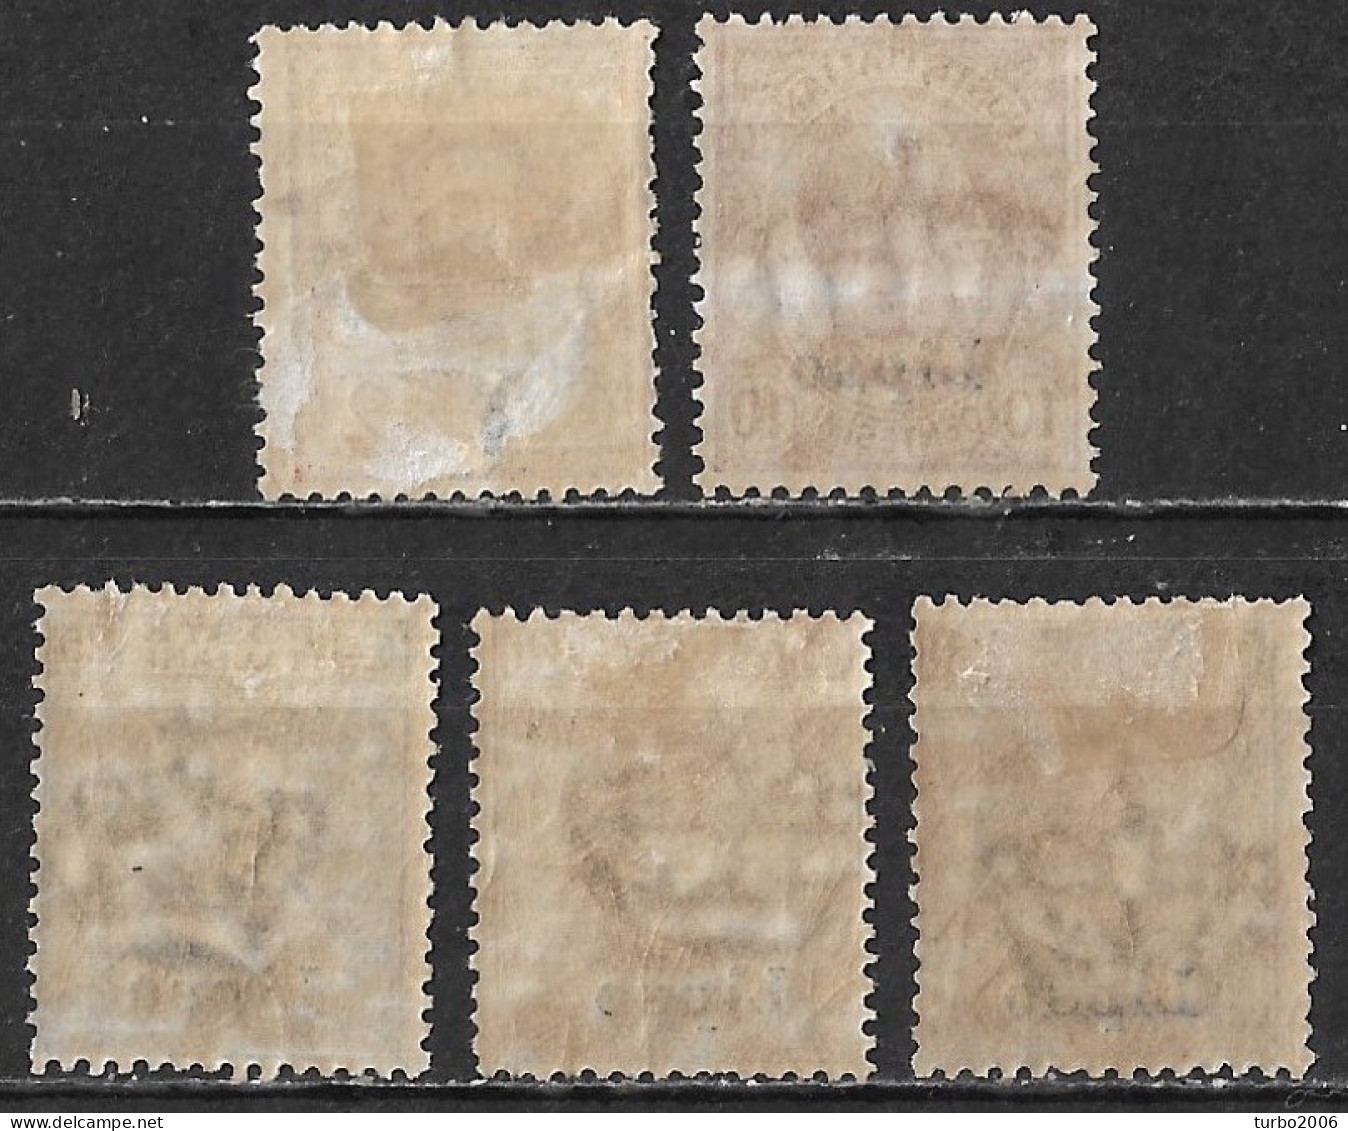 DODECANESE 1912 Italian Stamps With Black Overprint LIPSO 5 Values From The Set Vl. 1-3-5/7 MH - Dodécanèse